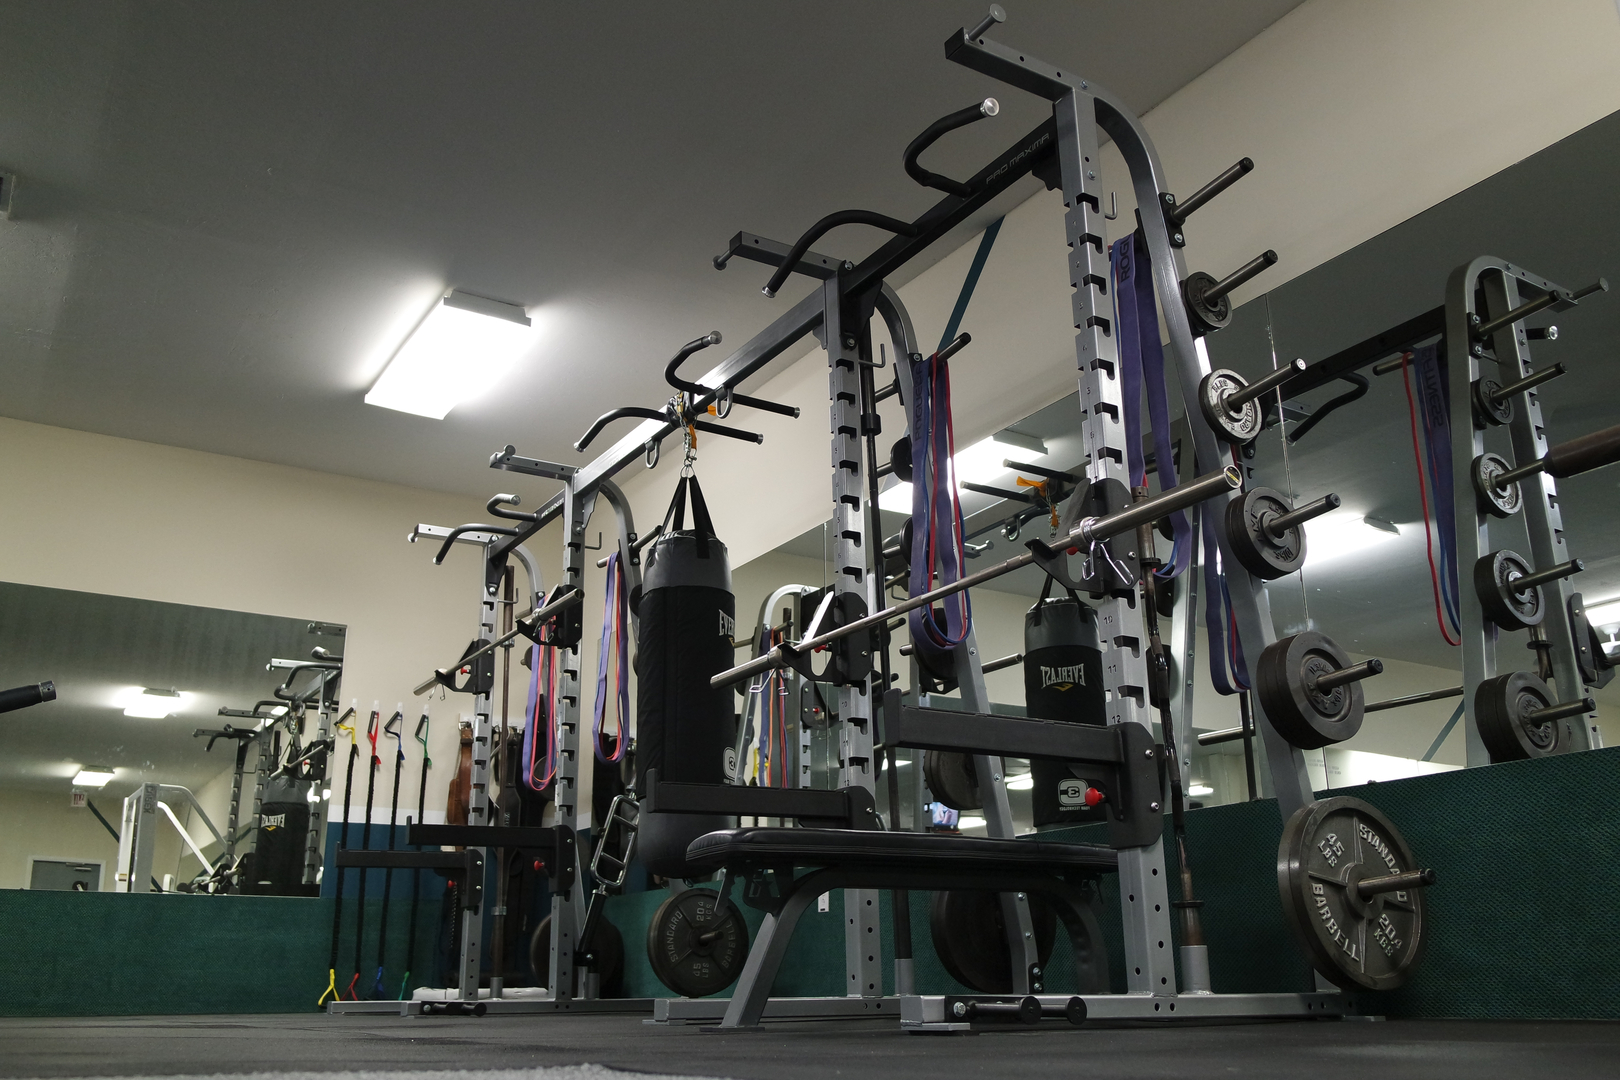 Marco Fitness Club - Free Weights, Cardio Equipment, Workout Equipment